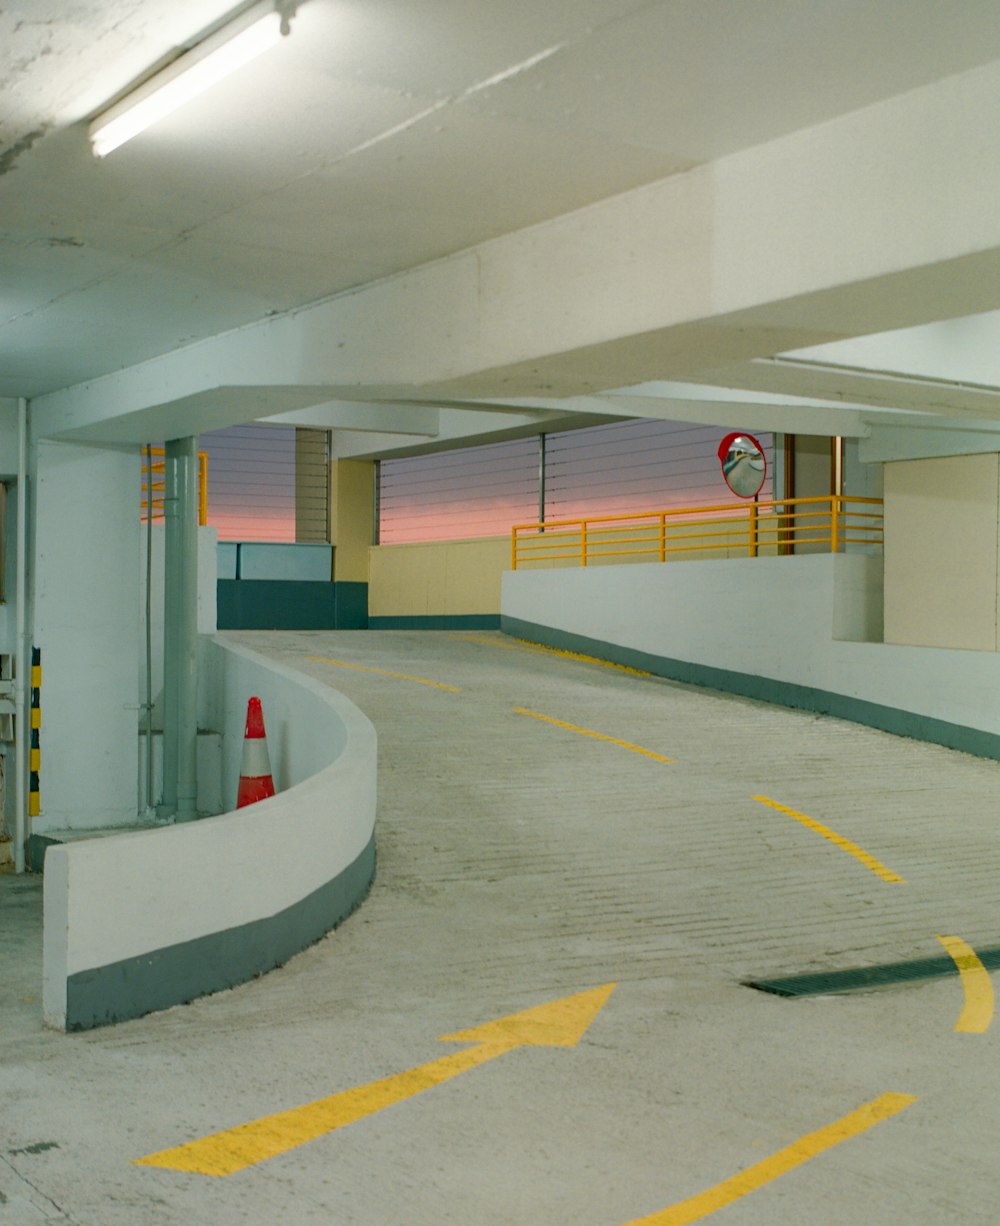 an empty parking garage with a fire hydrant